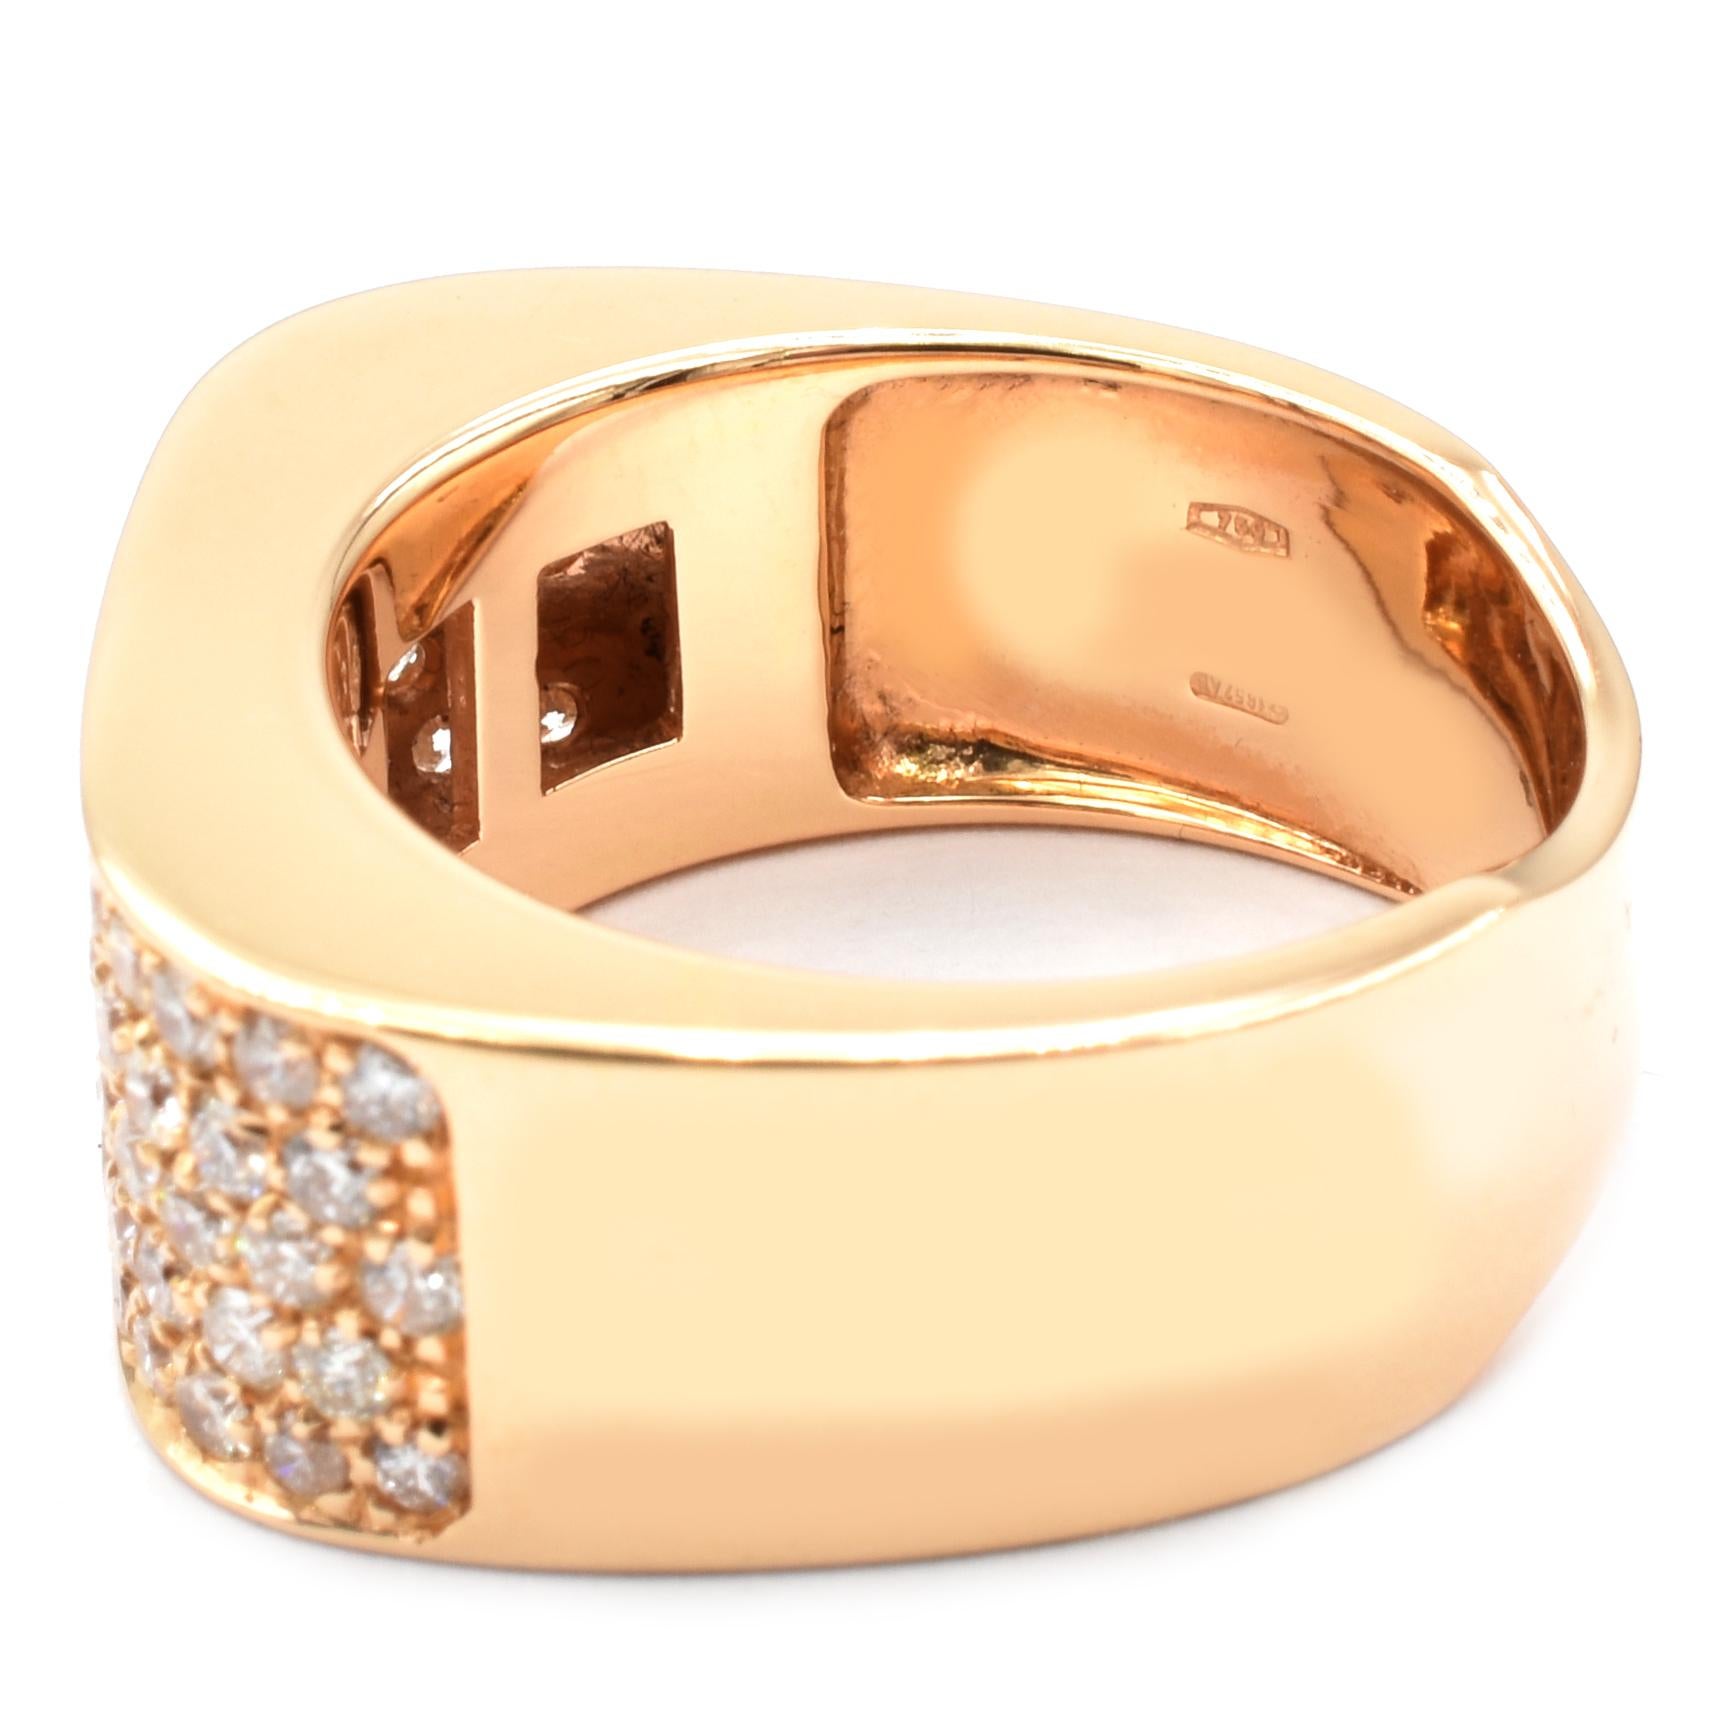 Contemporary Gilberto Cassola Diamond Pave Rose Gold Square Ring Made in Italy For Sale